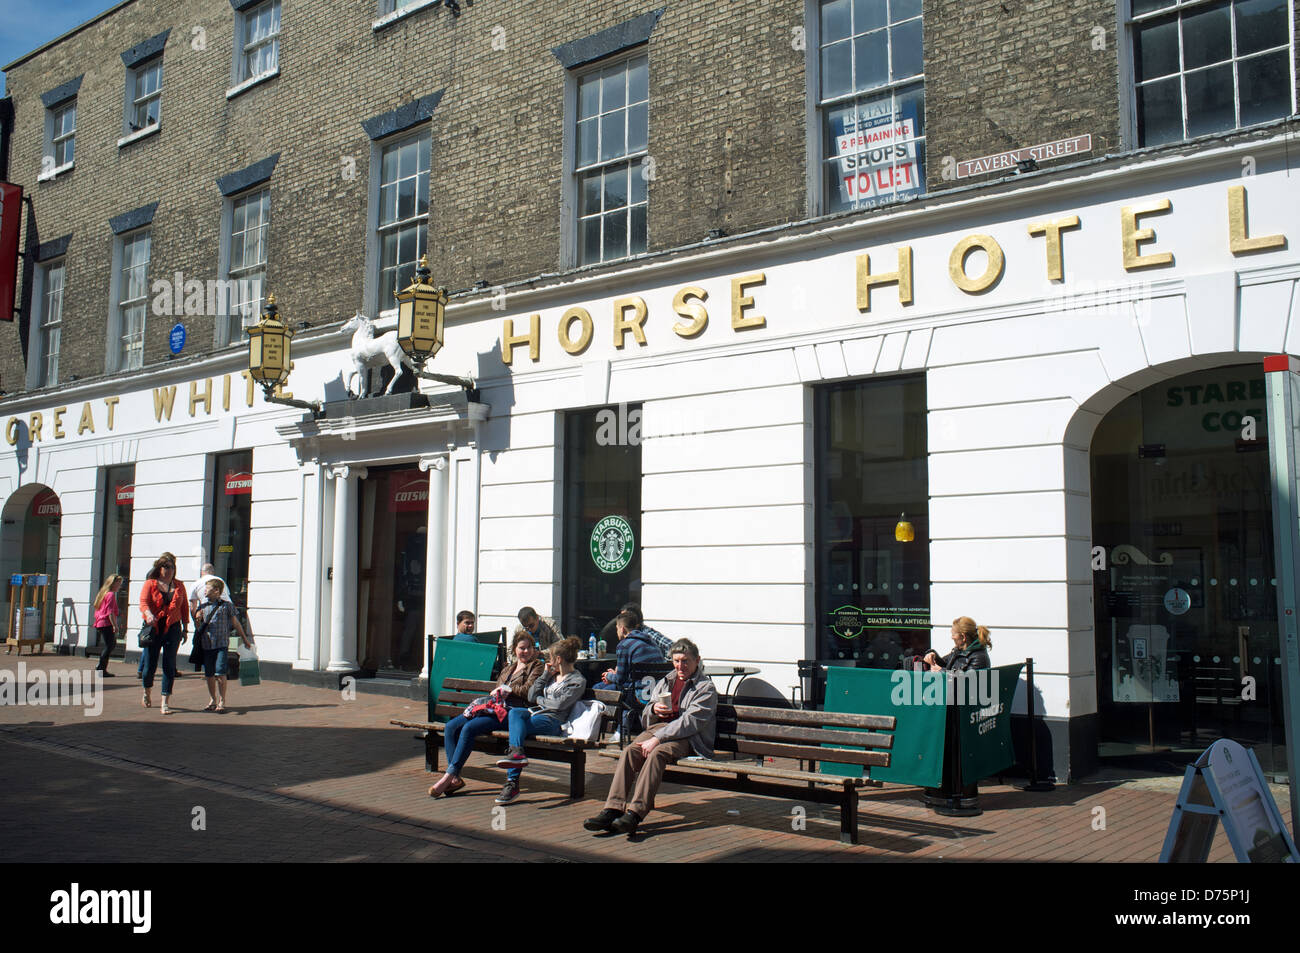 White Horse Hotel (now retail outlets) Ipswich, Suffolk, UK. Stock Photo